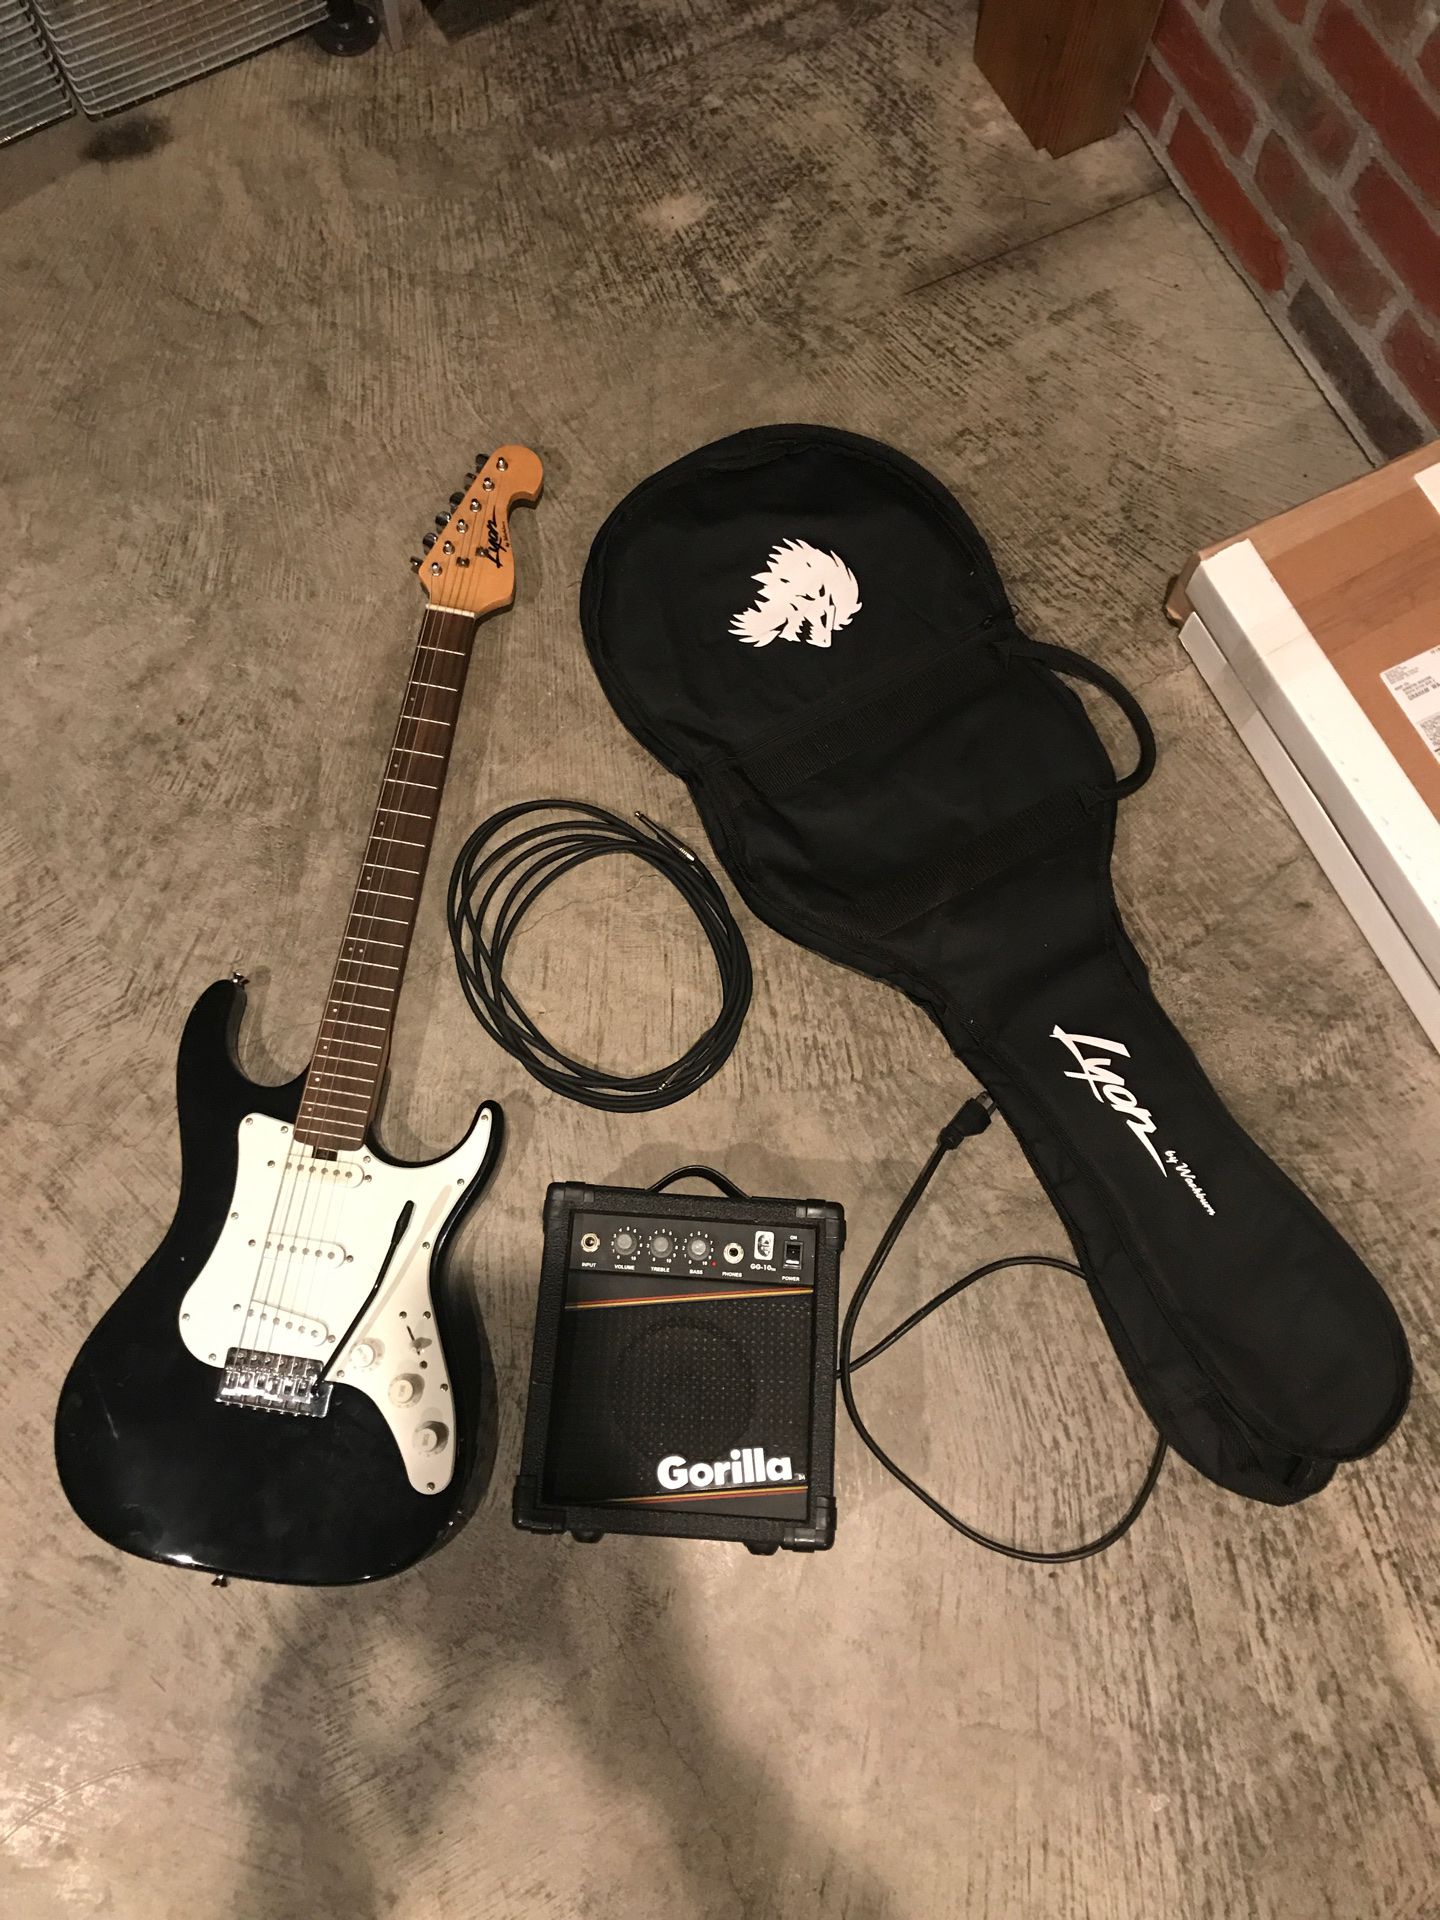 Washburn guitar with amp cable and bag